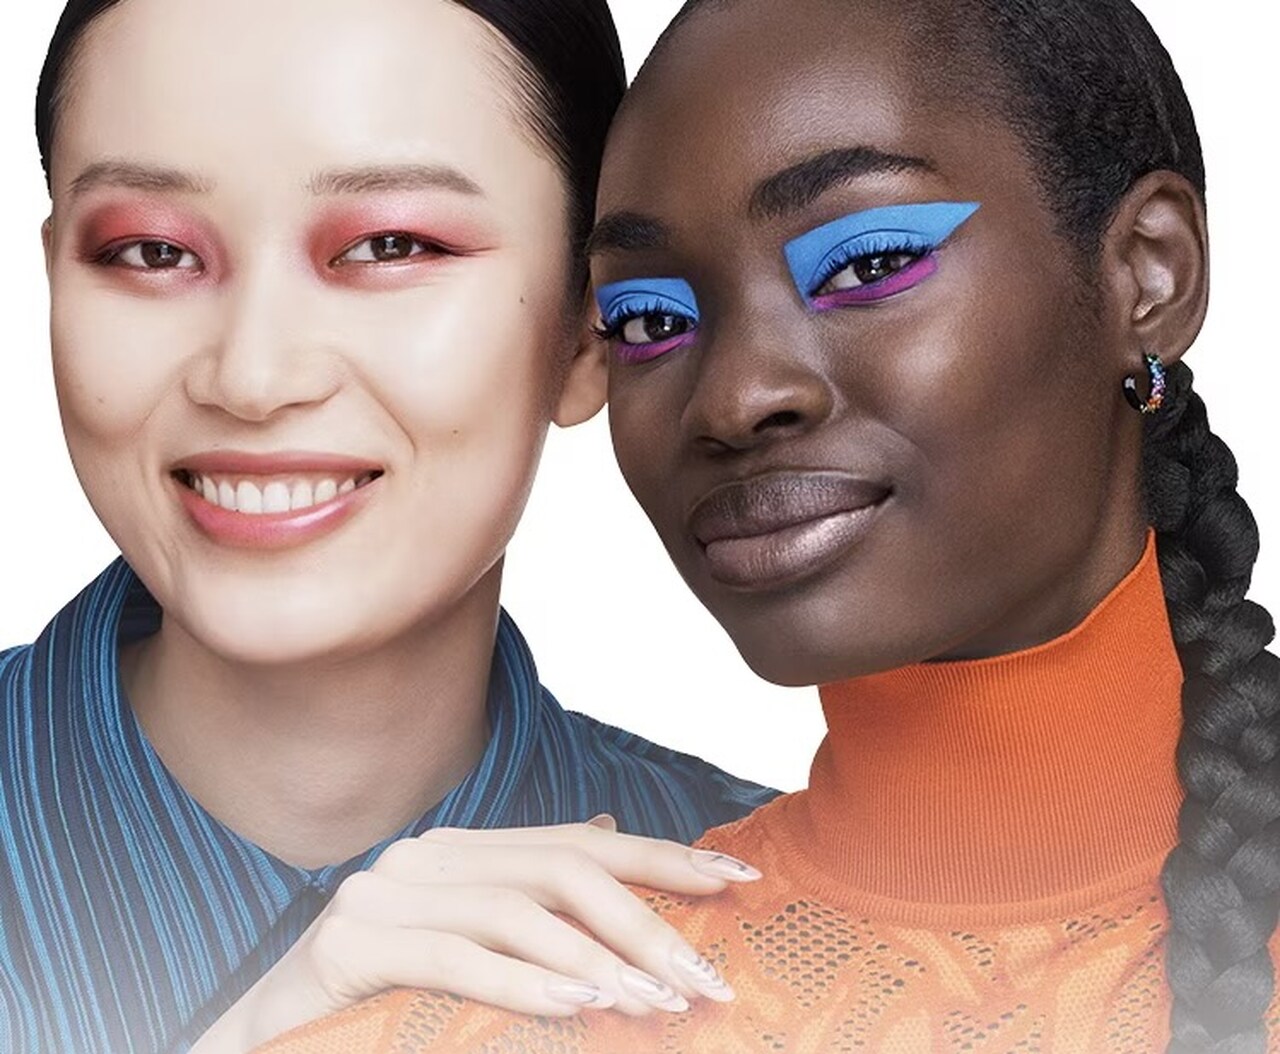 Mac Cosmetics - Connect in Color